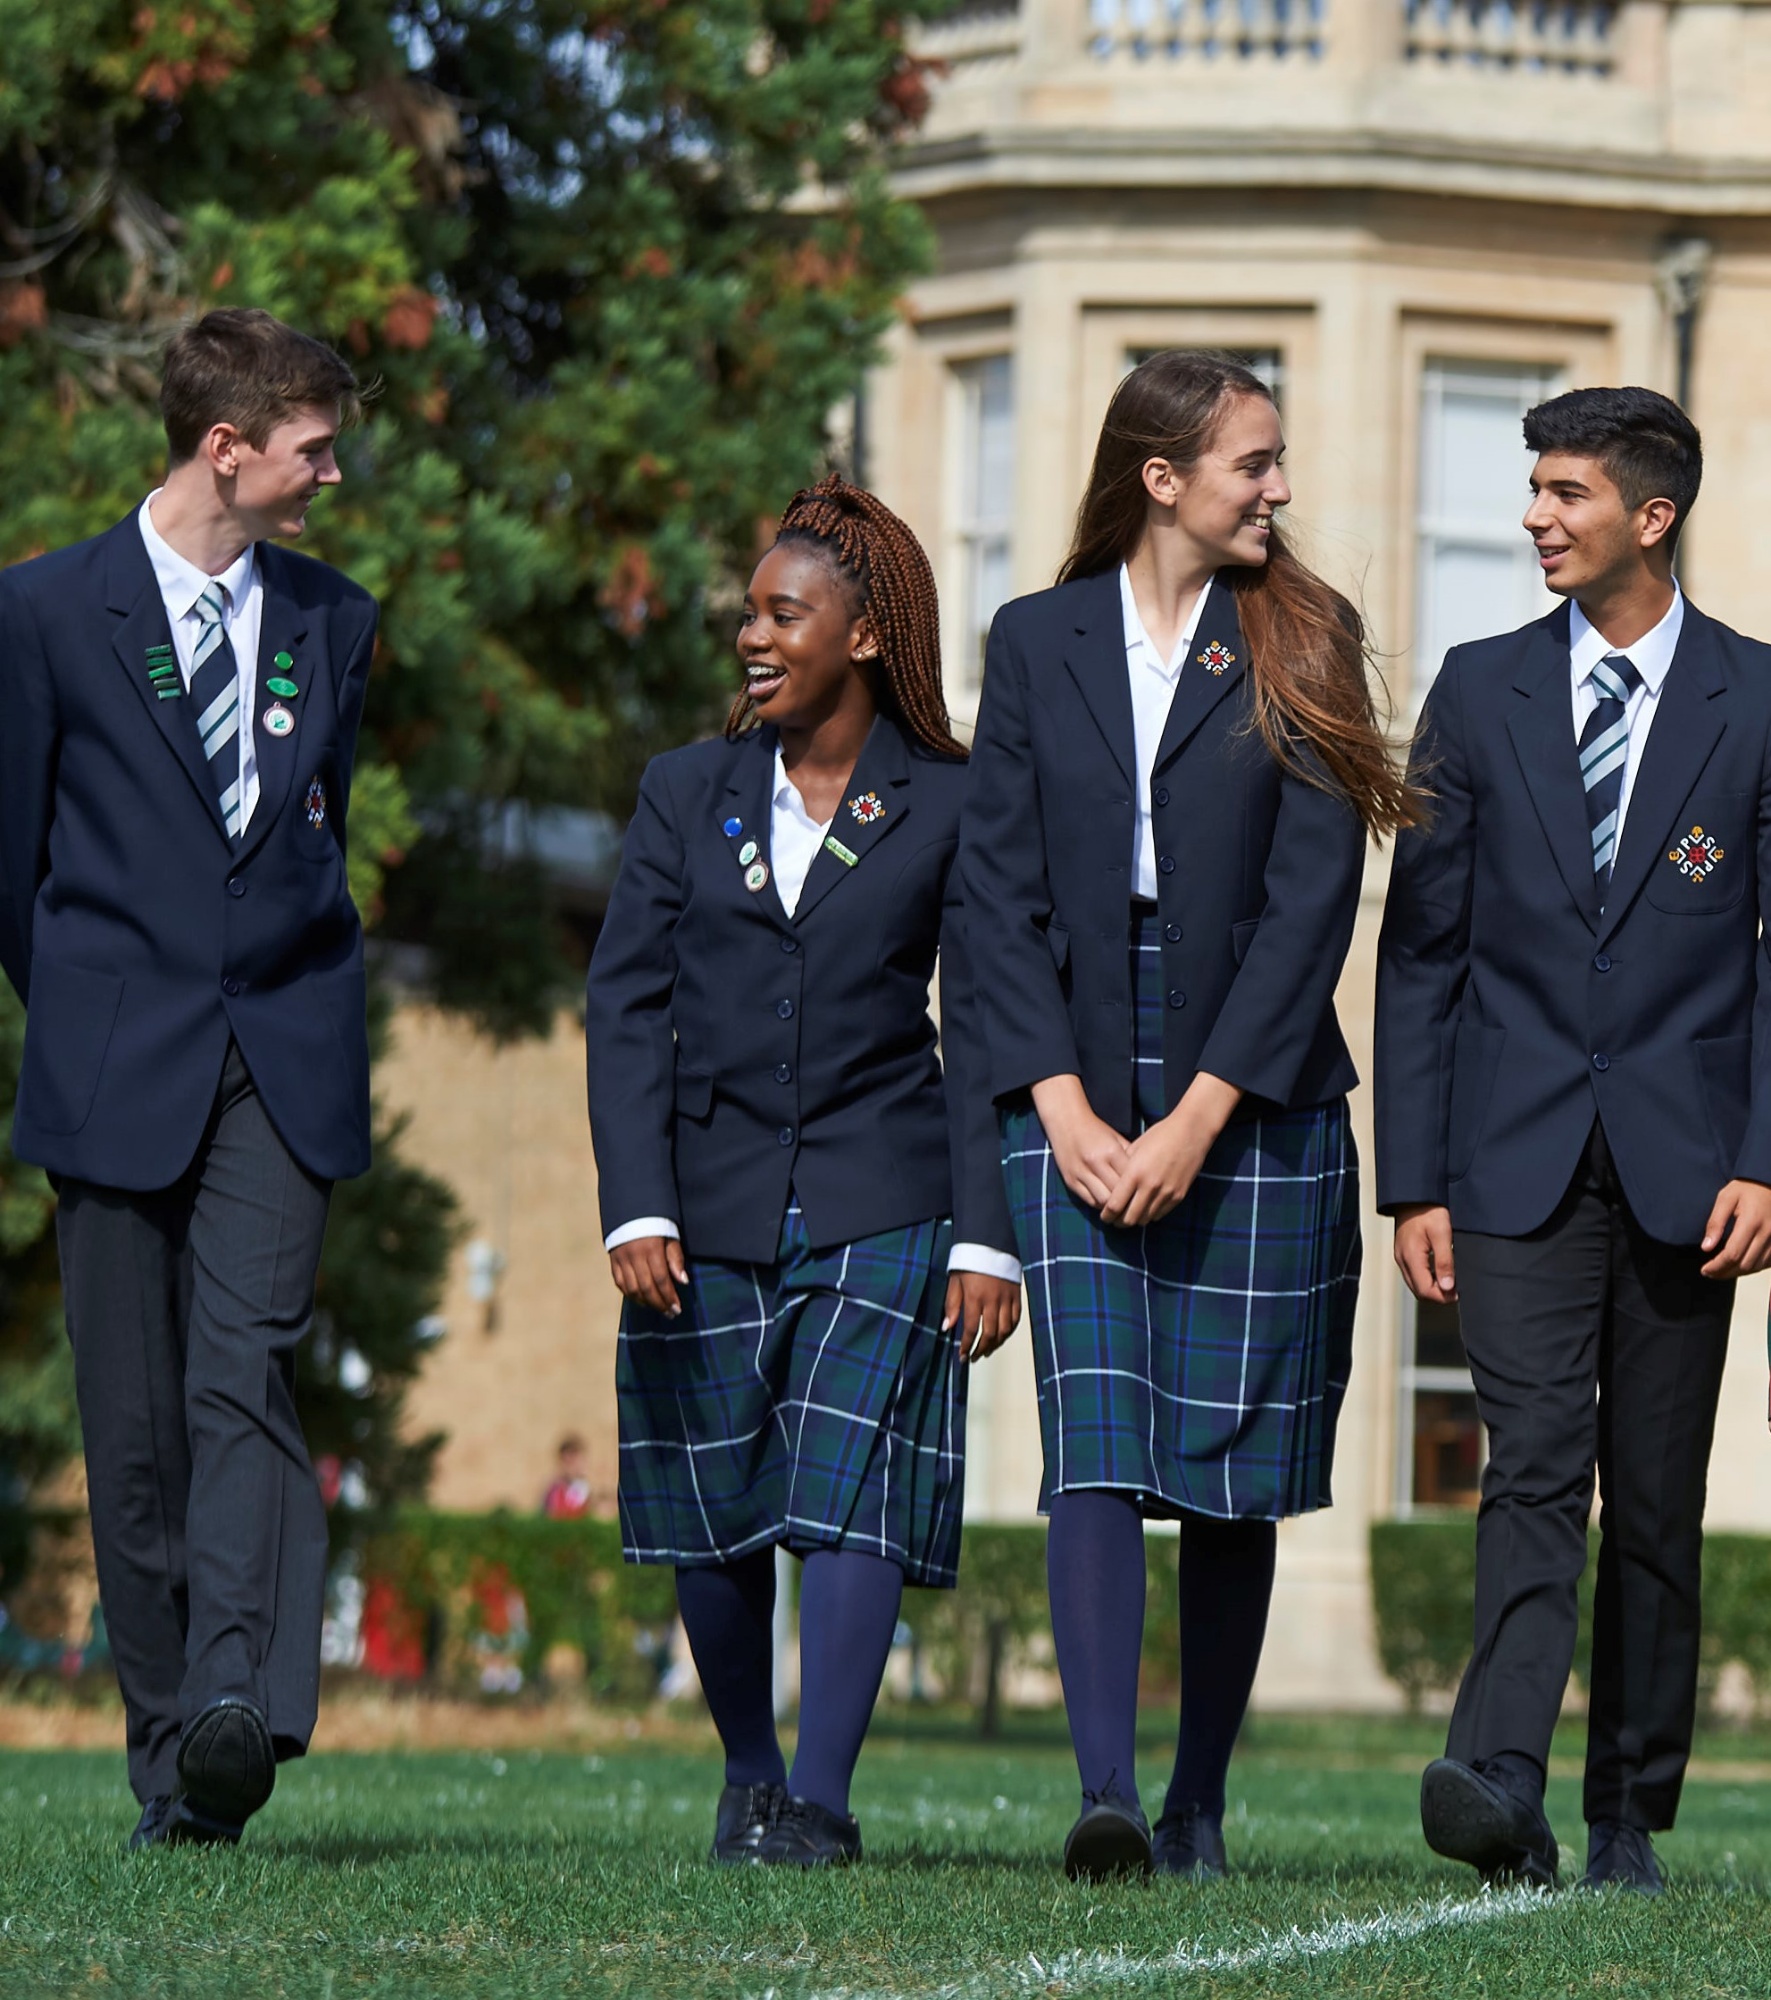 Sixth Formers in uniform